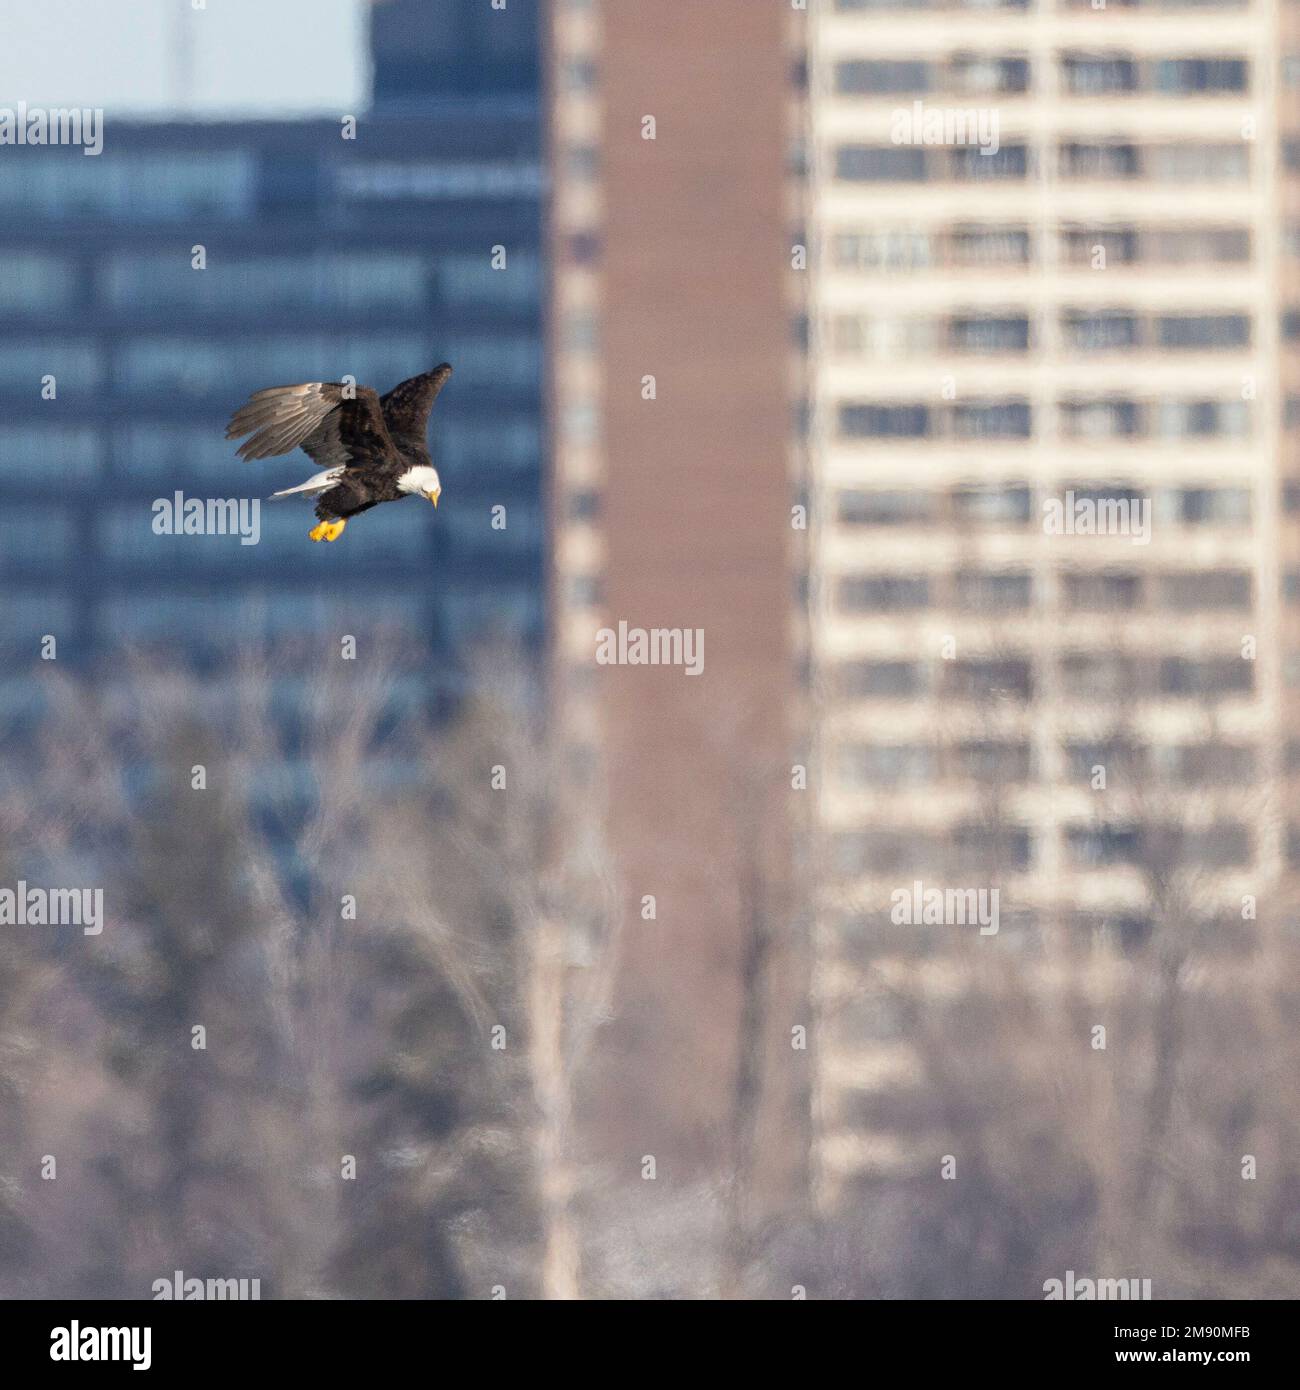 A bald eagle (Haliaeetus leucocephalus) gets ready to strike over the Ottawa River in the City of Ottawa with building in the background Stock Photo